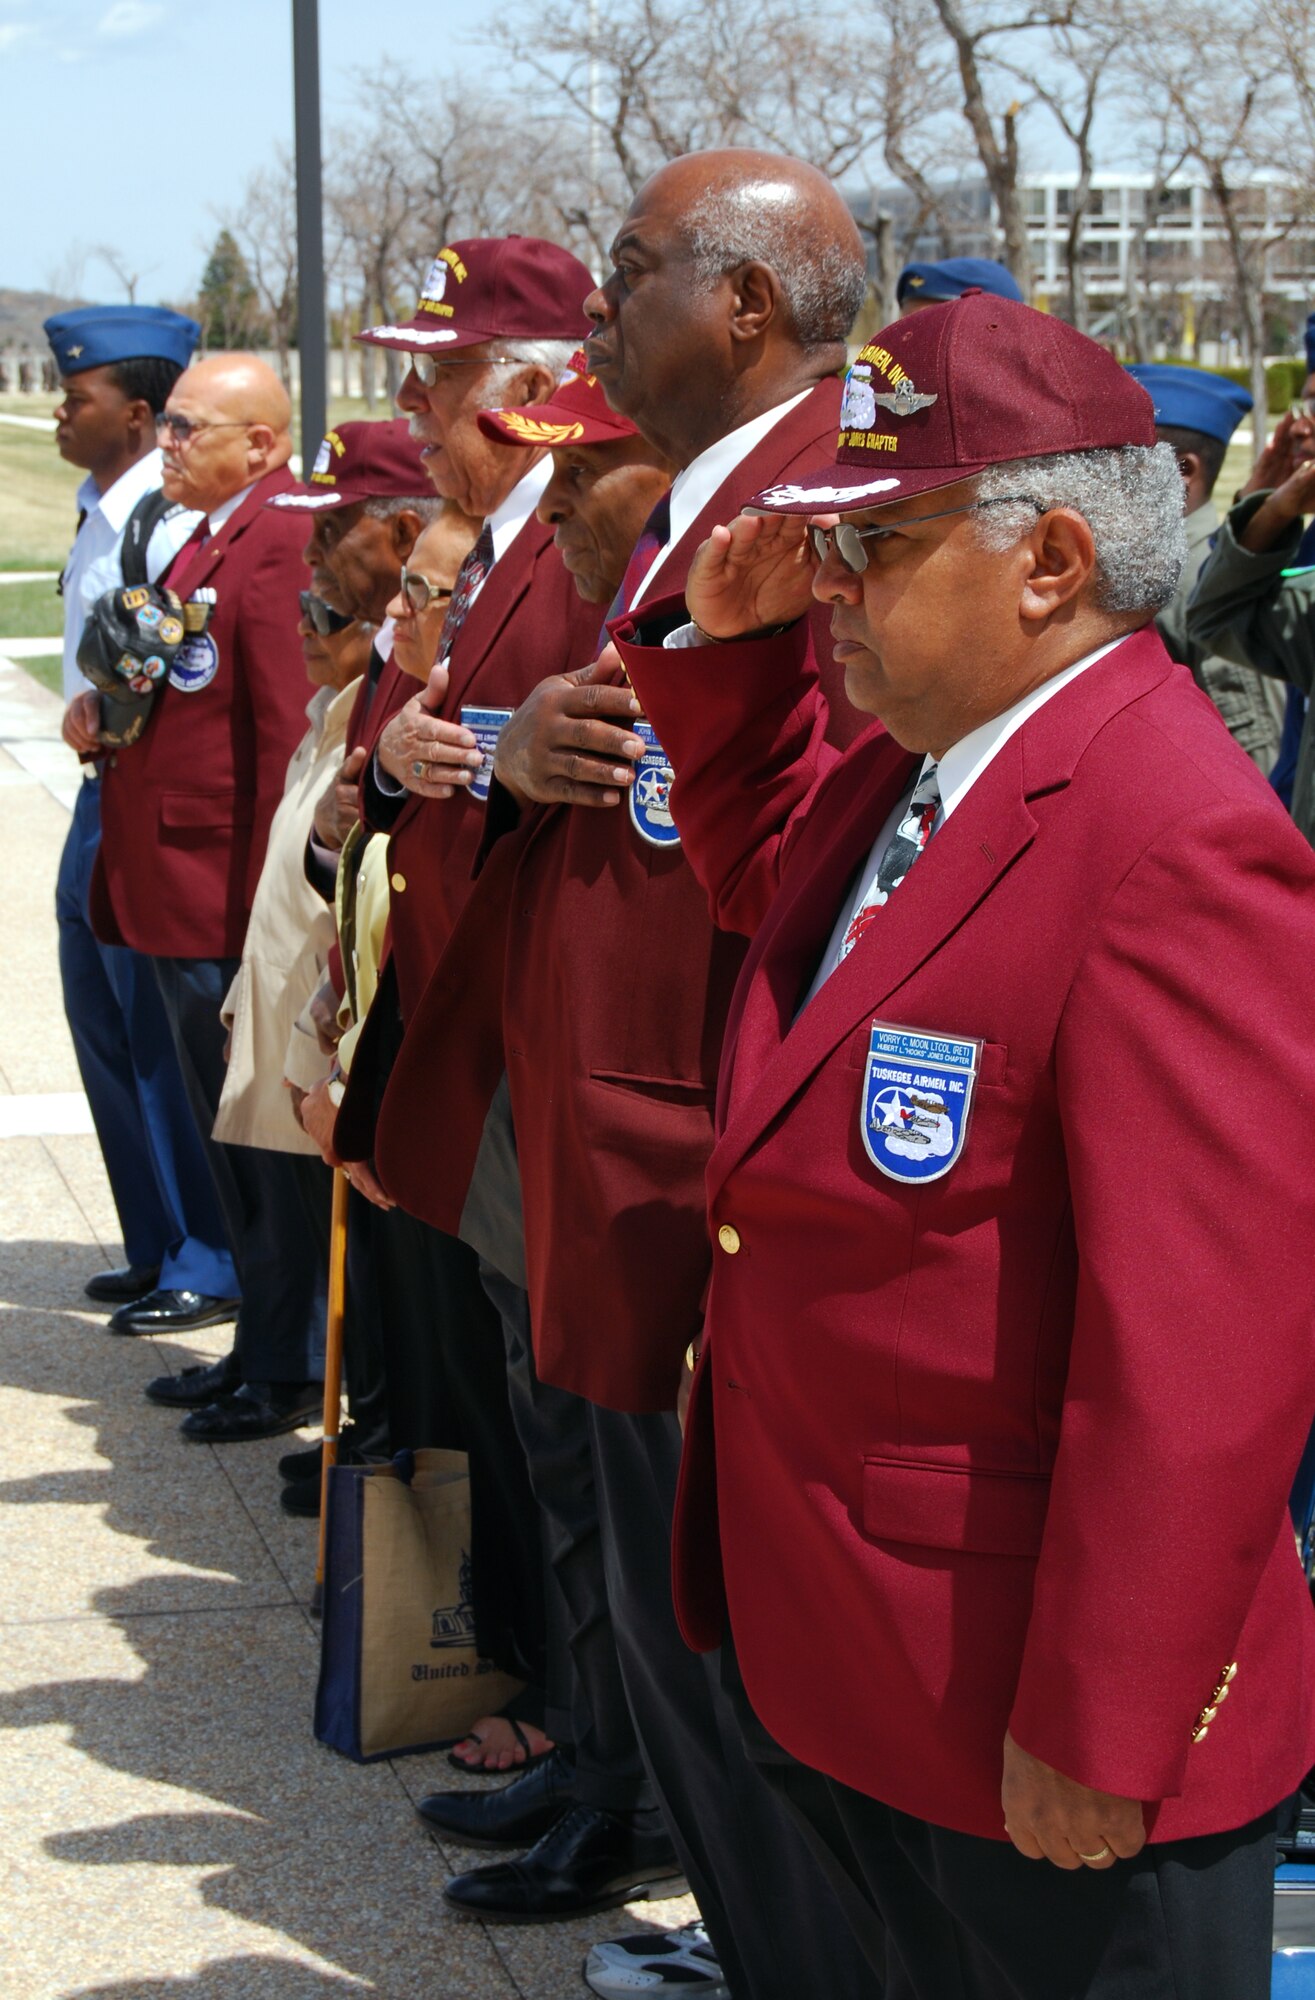 Tuskegee Airmen pay honors to the American flag during U.S. Air Force Academy cadets' noon formation at the Academy in Colorado Springs, Colo. The Academy's History Department invites the Tuskegee Airmen annually to share their history and experiences with cadets. (U.S. Air Force photo/Staff Sgt. Don Branum)